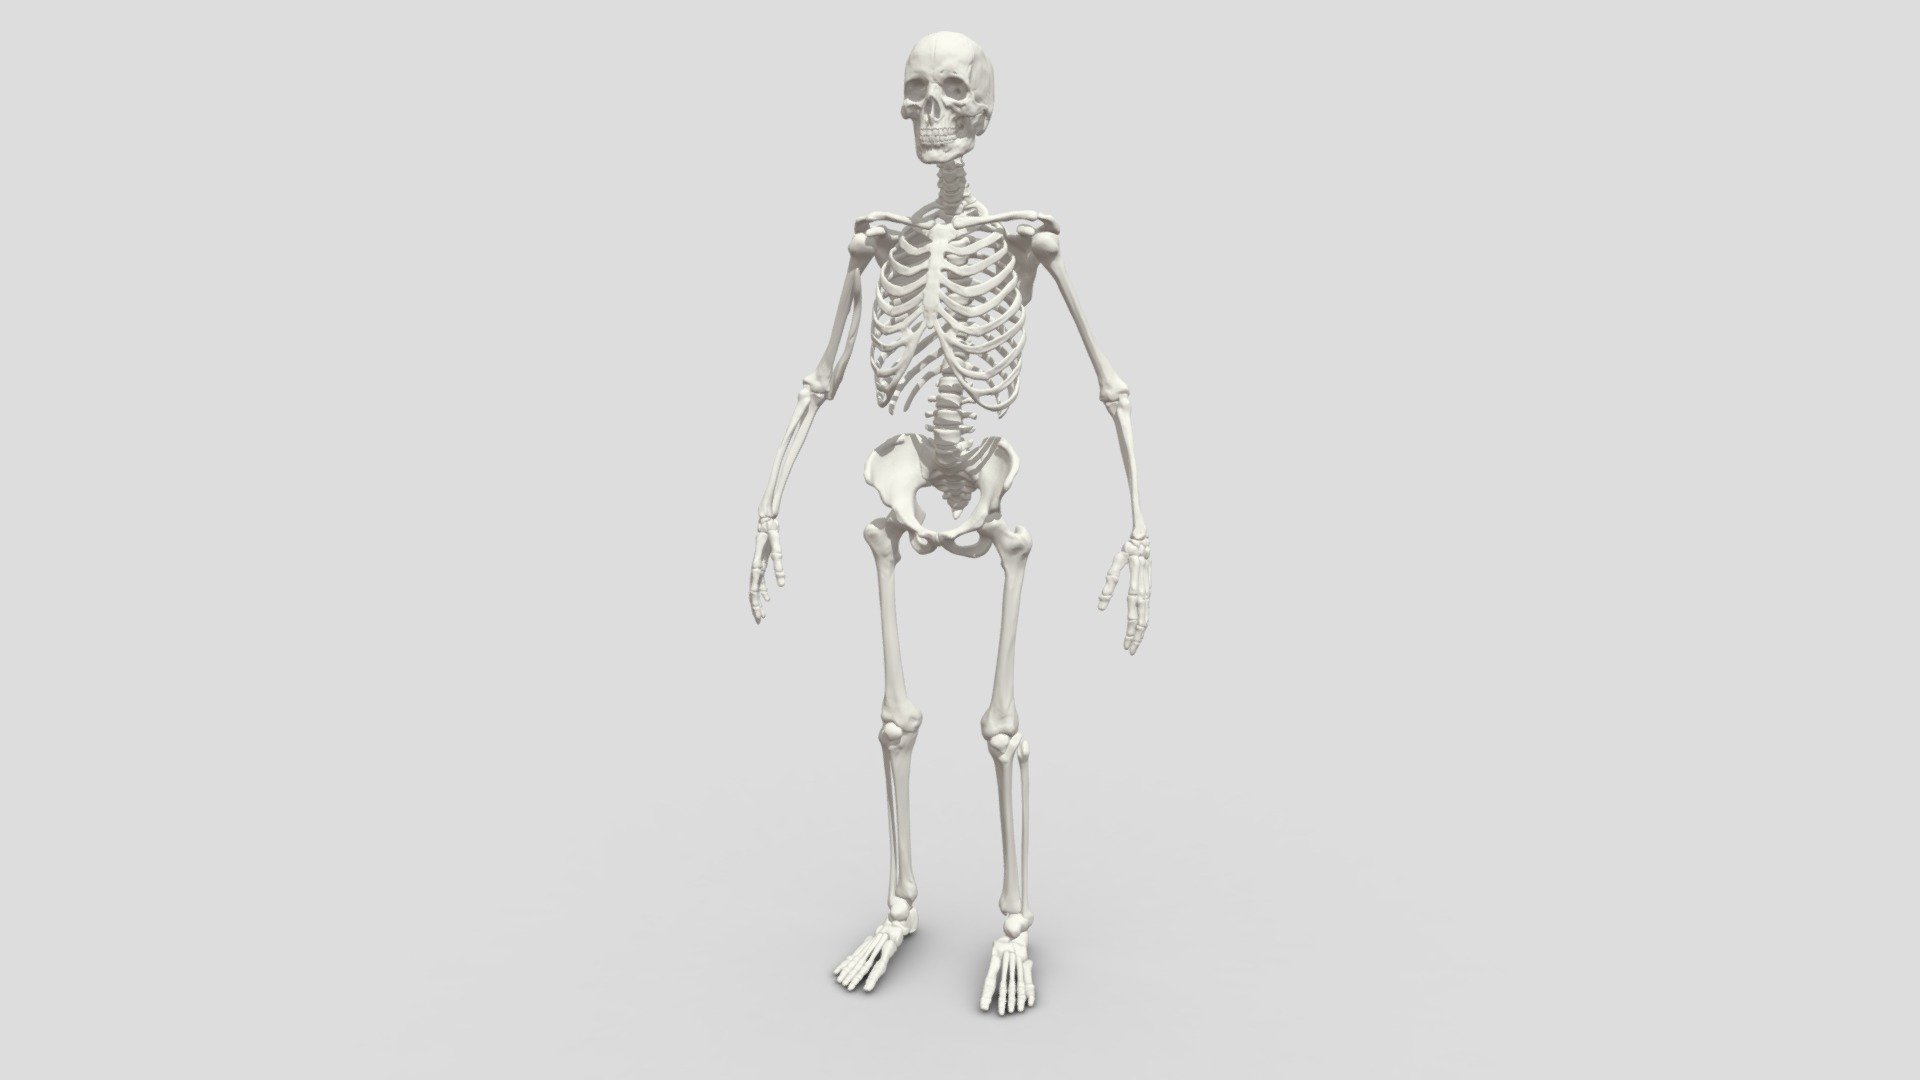 This is high-poly realistic 3d model of Human Skeleton.
The model can be used for 3D visualization and rendering.
The model has no texture 3d model